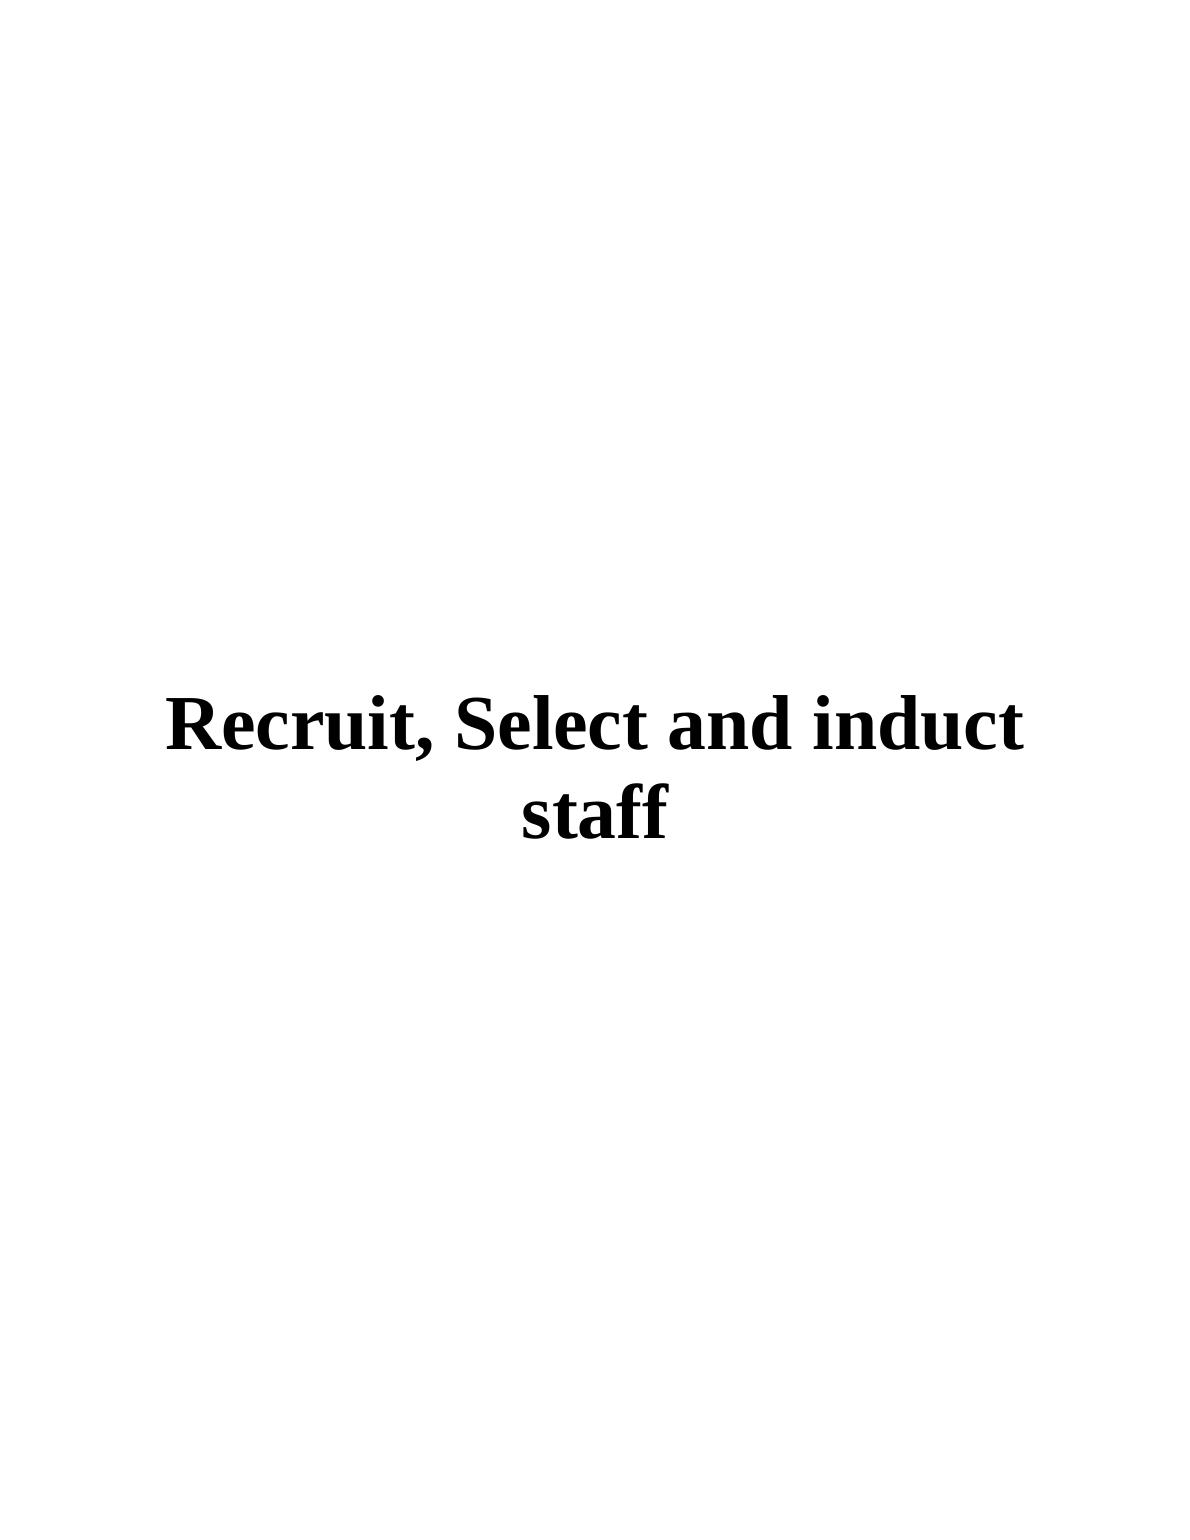 Recruit, Select and Induct Staff: Assignment_1